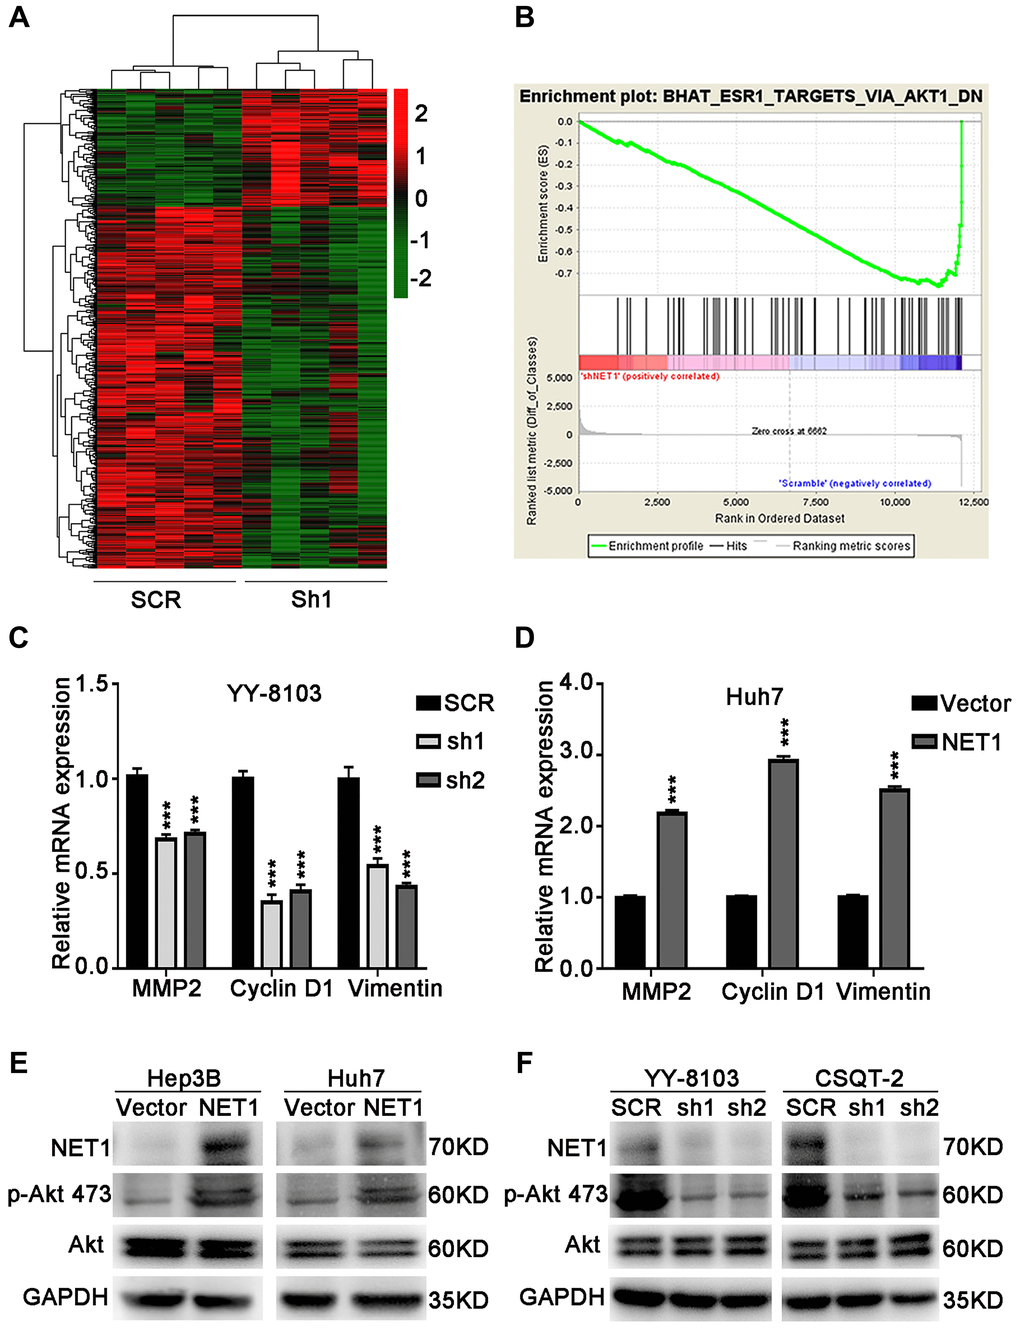 NET1 activates Akt signaling in HCC cells. (A) Hierarchical clustering generated from the expression profiles of differentially expressed mRNA levels in YY-8103 control and shNET1 groups. (B) Gene set enrichment analysis of altered signaling pathways in YY-8103 control and shNET1 groups. (C) Effects of NET1 knockdown on the expression of MMP2, Cyclin D1 and Vimentin in YY-8103 cells examined by real-time PCR. ***P D) Effects of NET1 overexpression on the expression of MMP2, Cyclin D1 and Vimentin in Huh7 cells examined by real-time PCR. ***P E) Effects of NET1 overexpression on the phosphorylation of Akt in Hep3B and Huh7 cells examined by Western blot. (F) Effects of NET1 knockdown on the phosphorylation of Akt in YY-8103 and CSQT-2 cells examined by Western blot. All data are presented as mean ± SE.